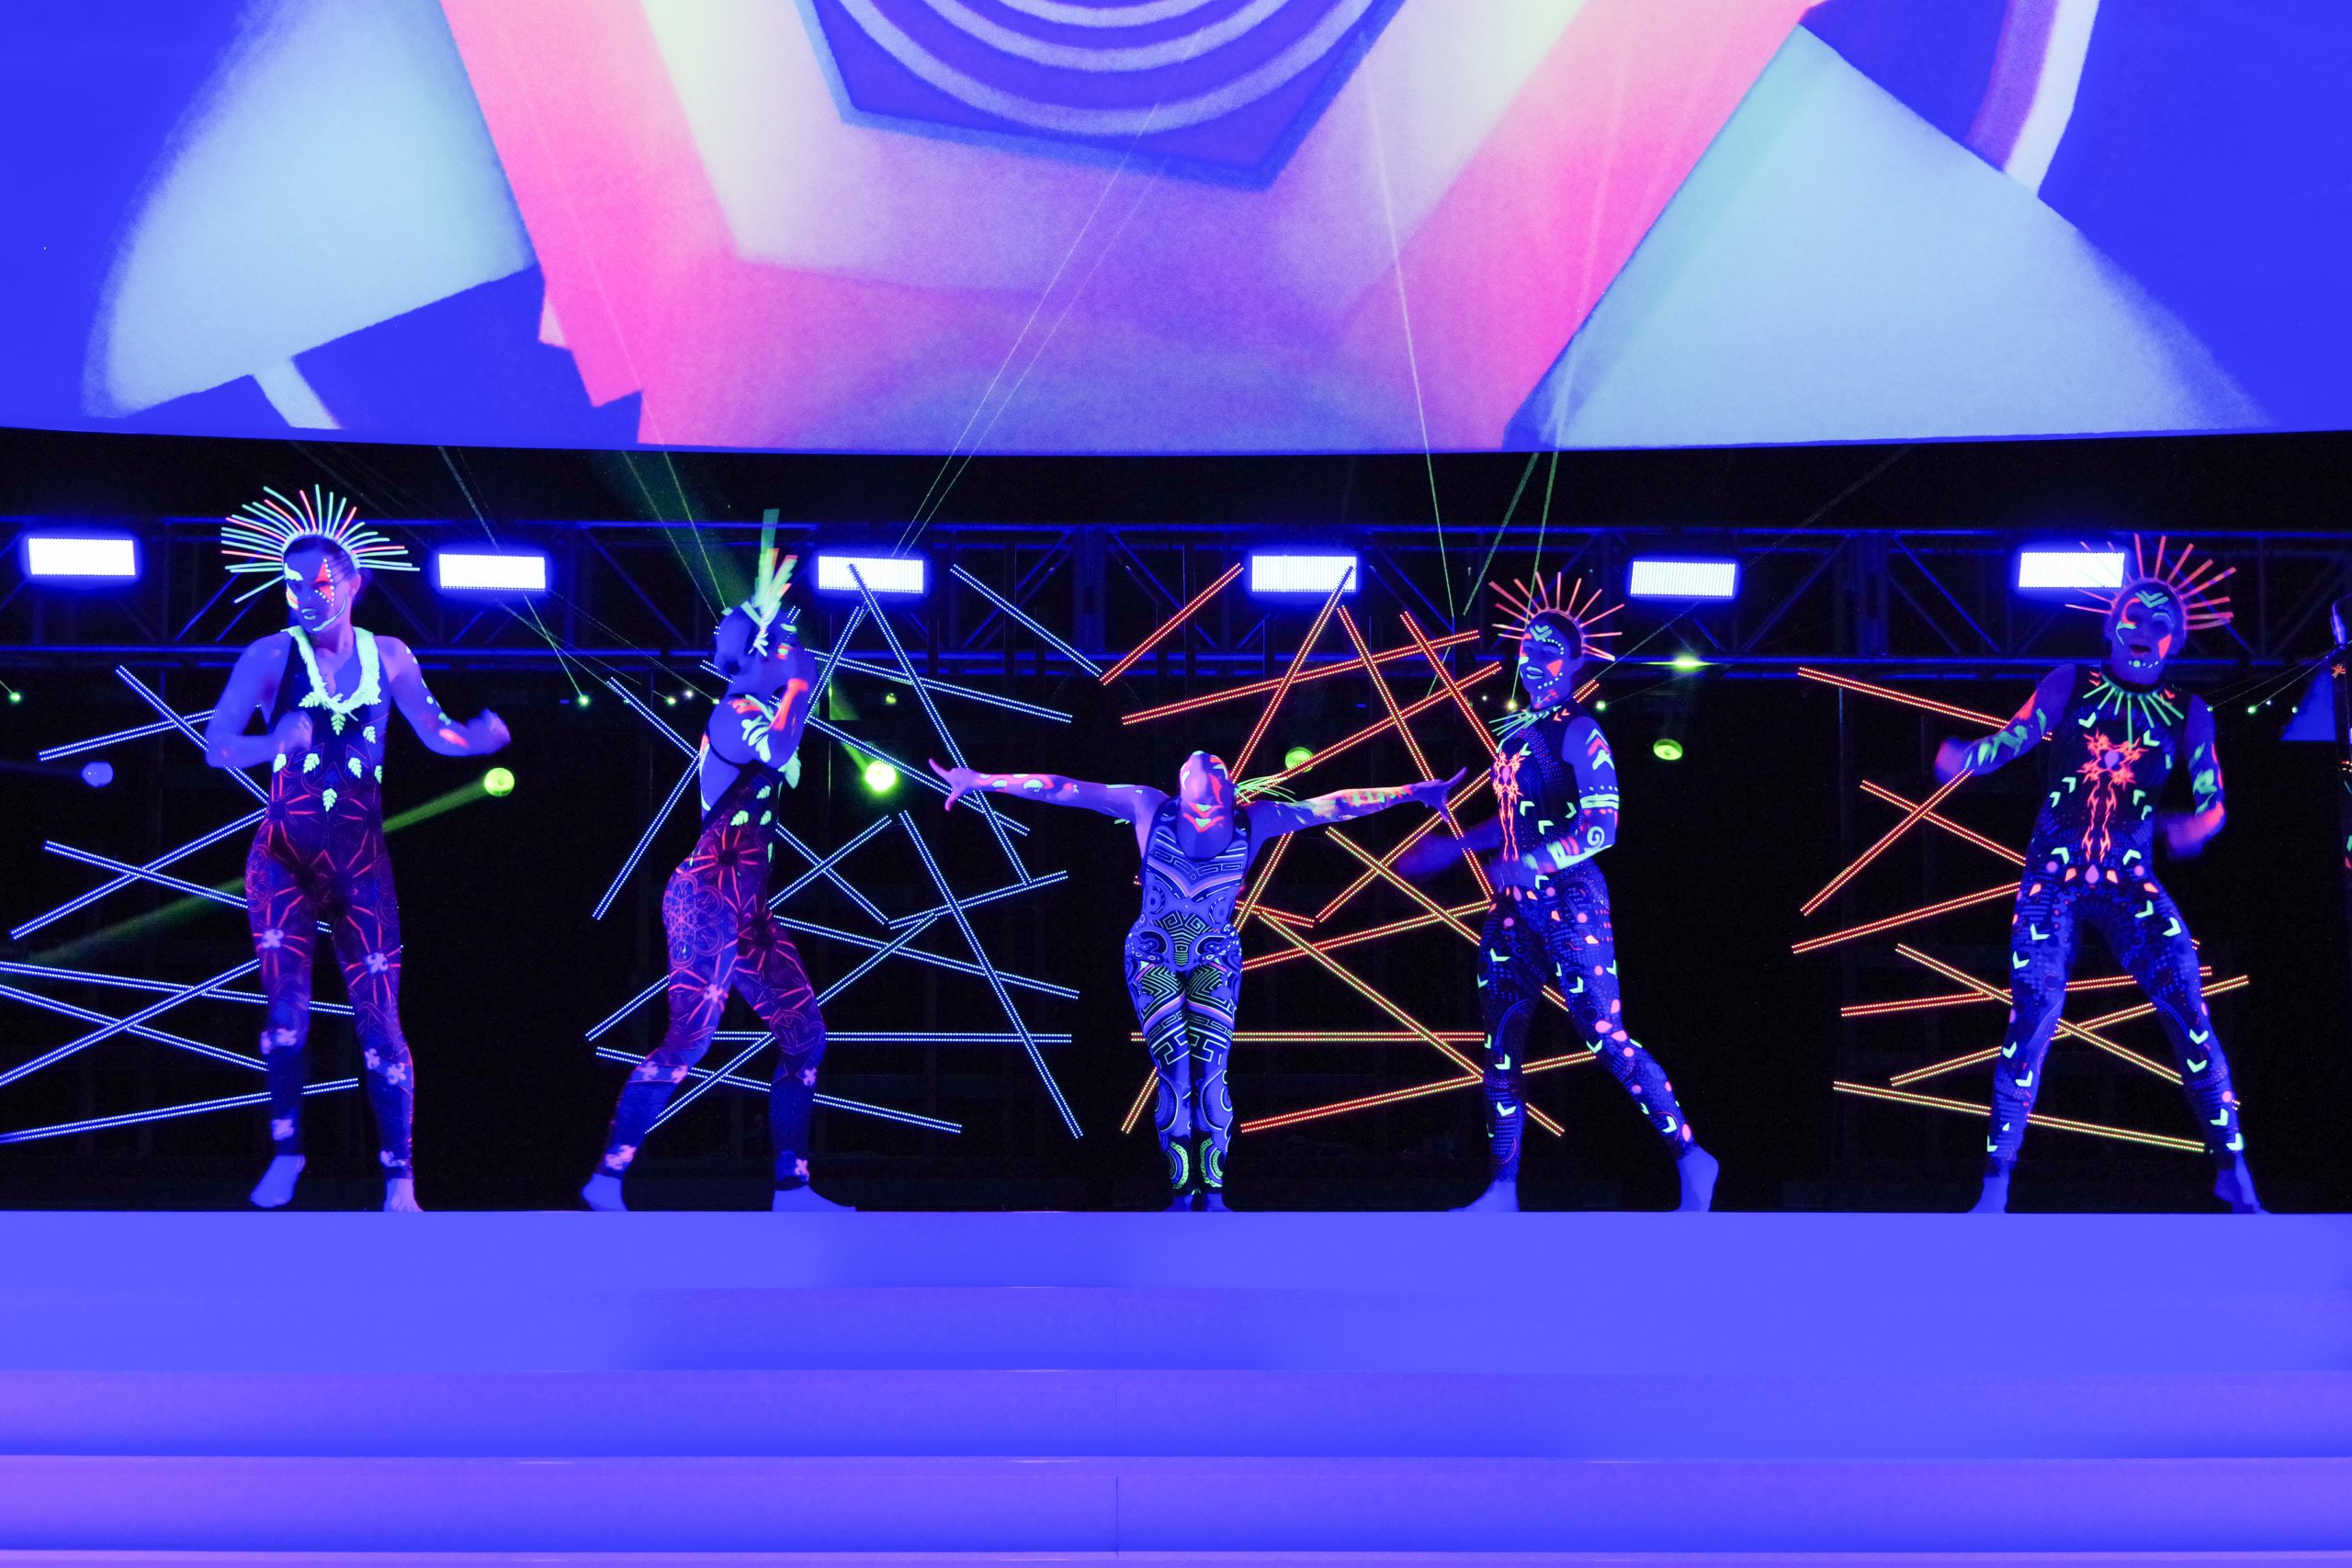 5 dancers in suits with led lights